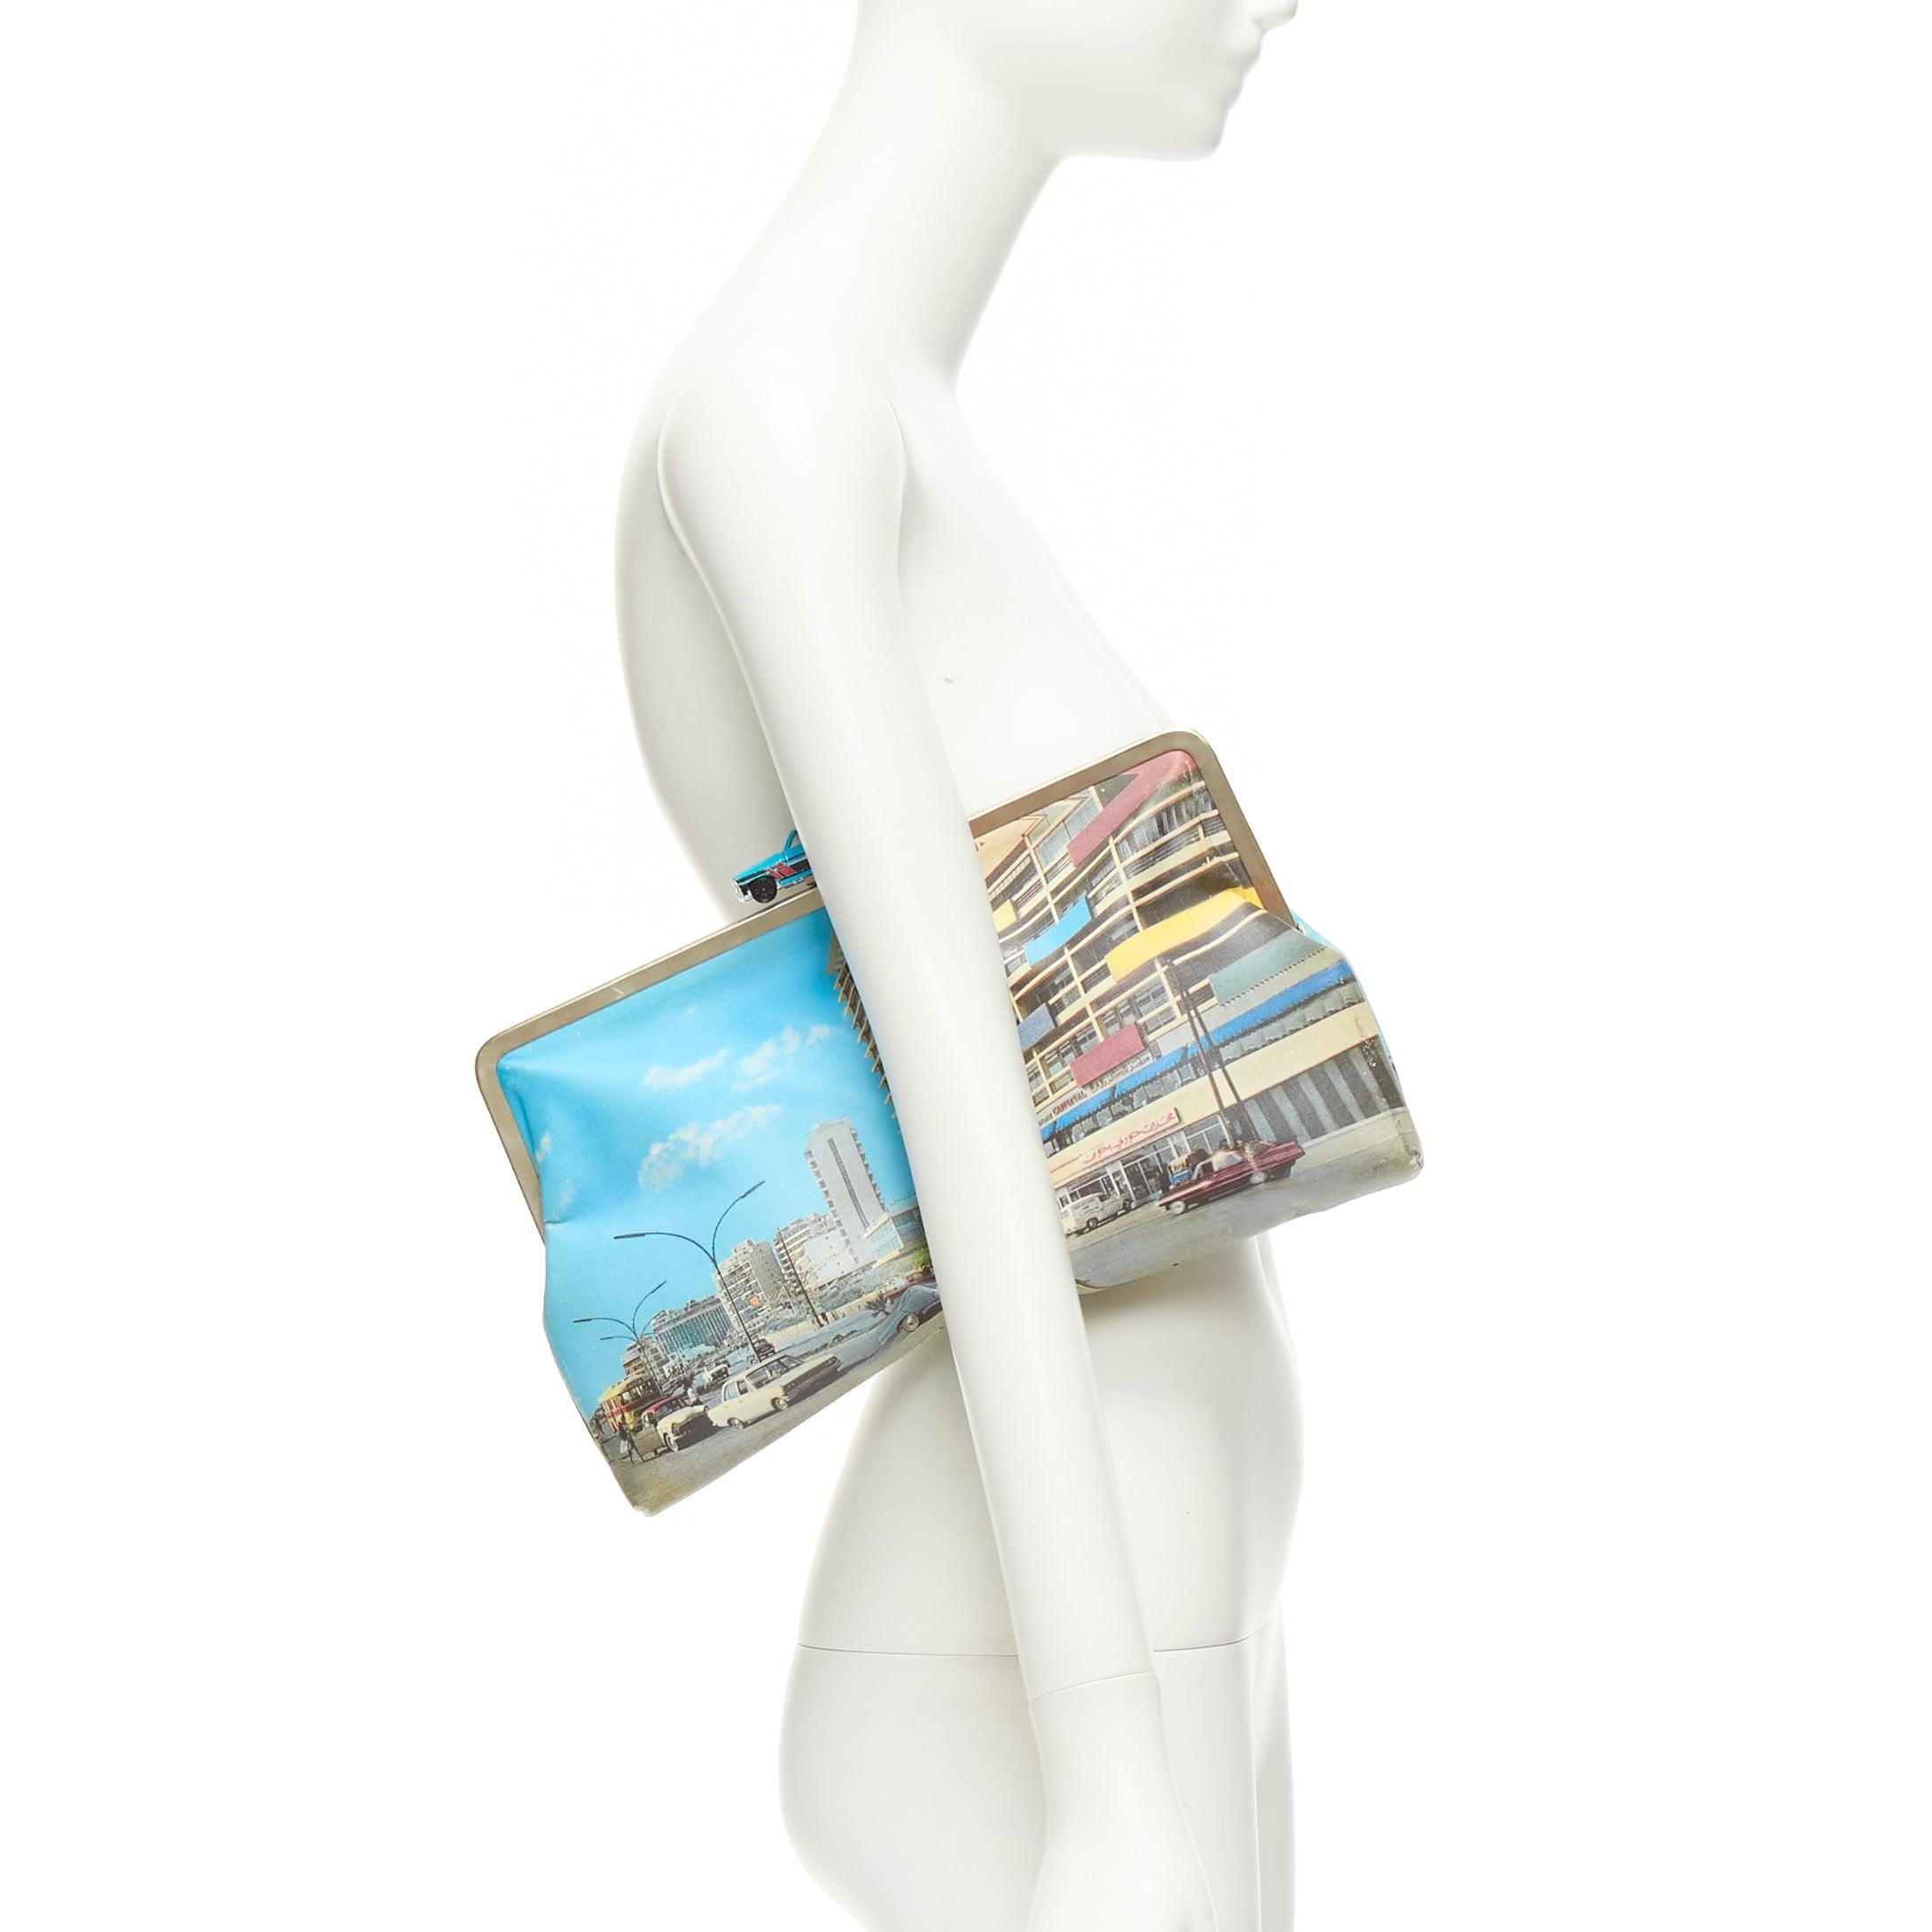 SARAH'S BAG blue vintage car clasp street print canvas silver frame clutch bag
Reference: NKLL/A00234
Brand: Sarah's Bag
Material: Canvas, Metal
Color: Multicolour, Blue
Pattern: Photographic Print
Closure: Push Clasp
Lining: Neon Yellow